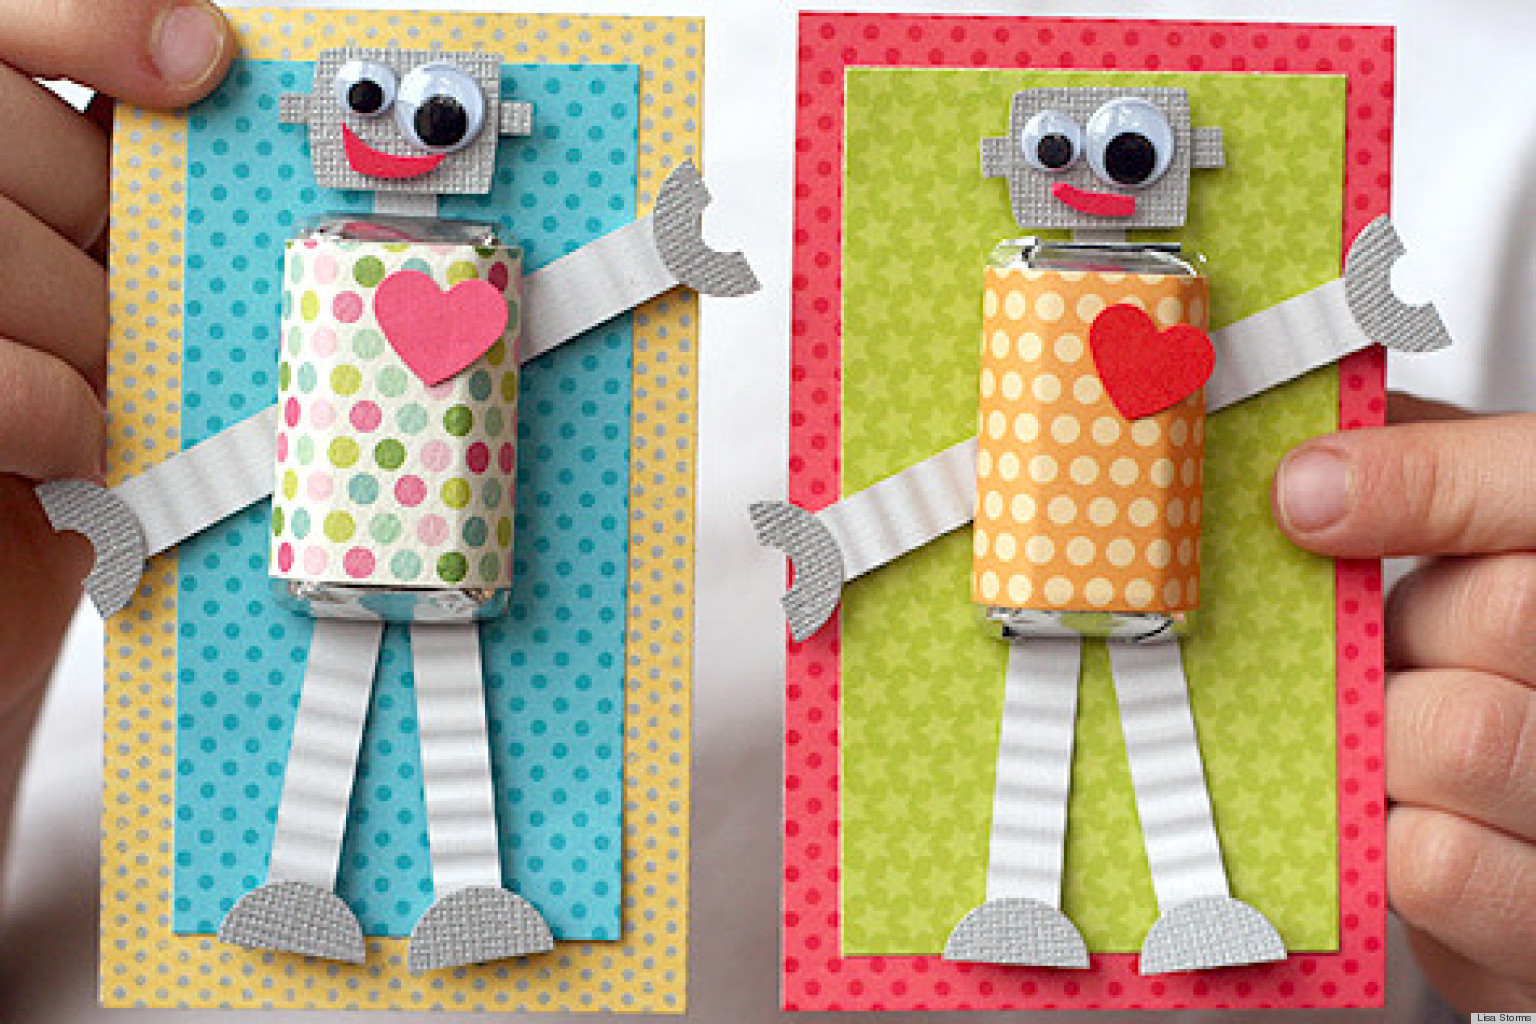 DIY Robot For Kids
 Valentine s Day Ideas Make These Adorable DIY Robot Cards